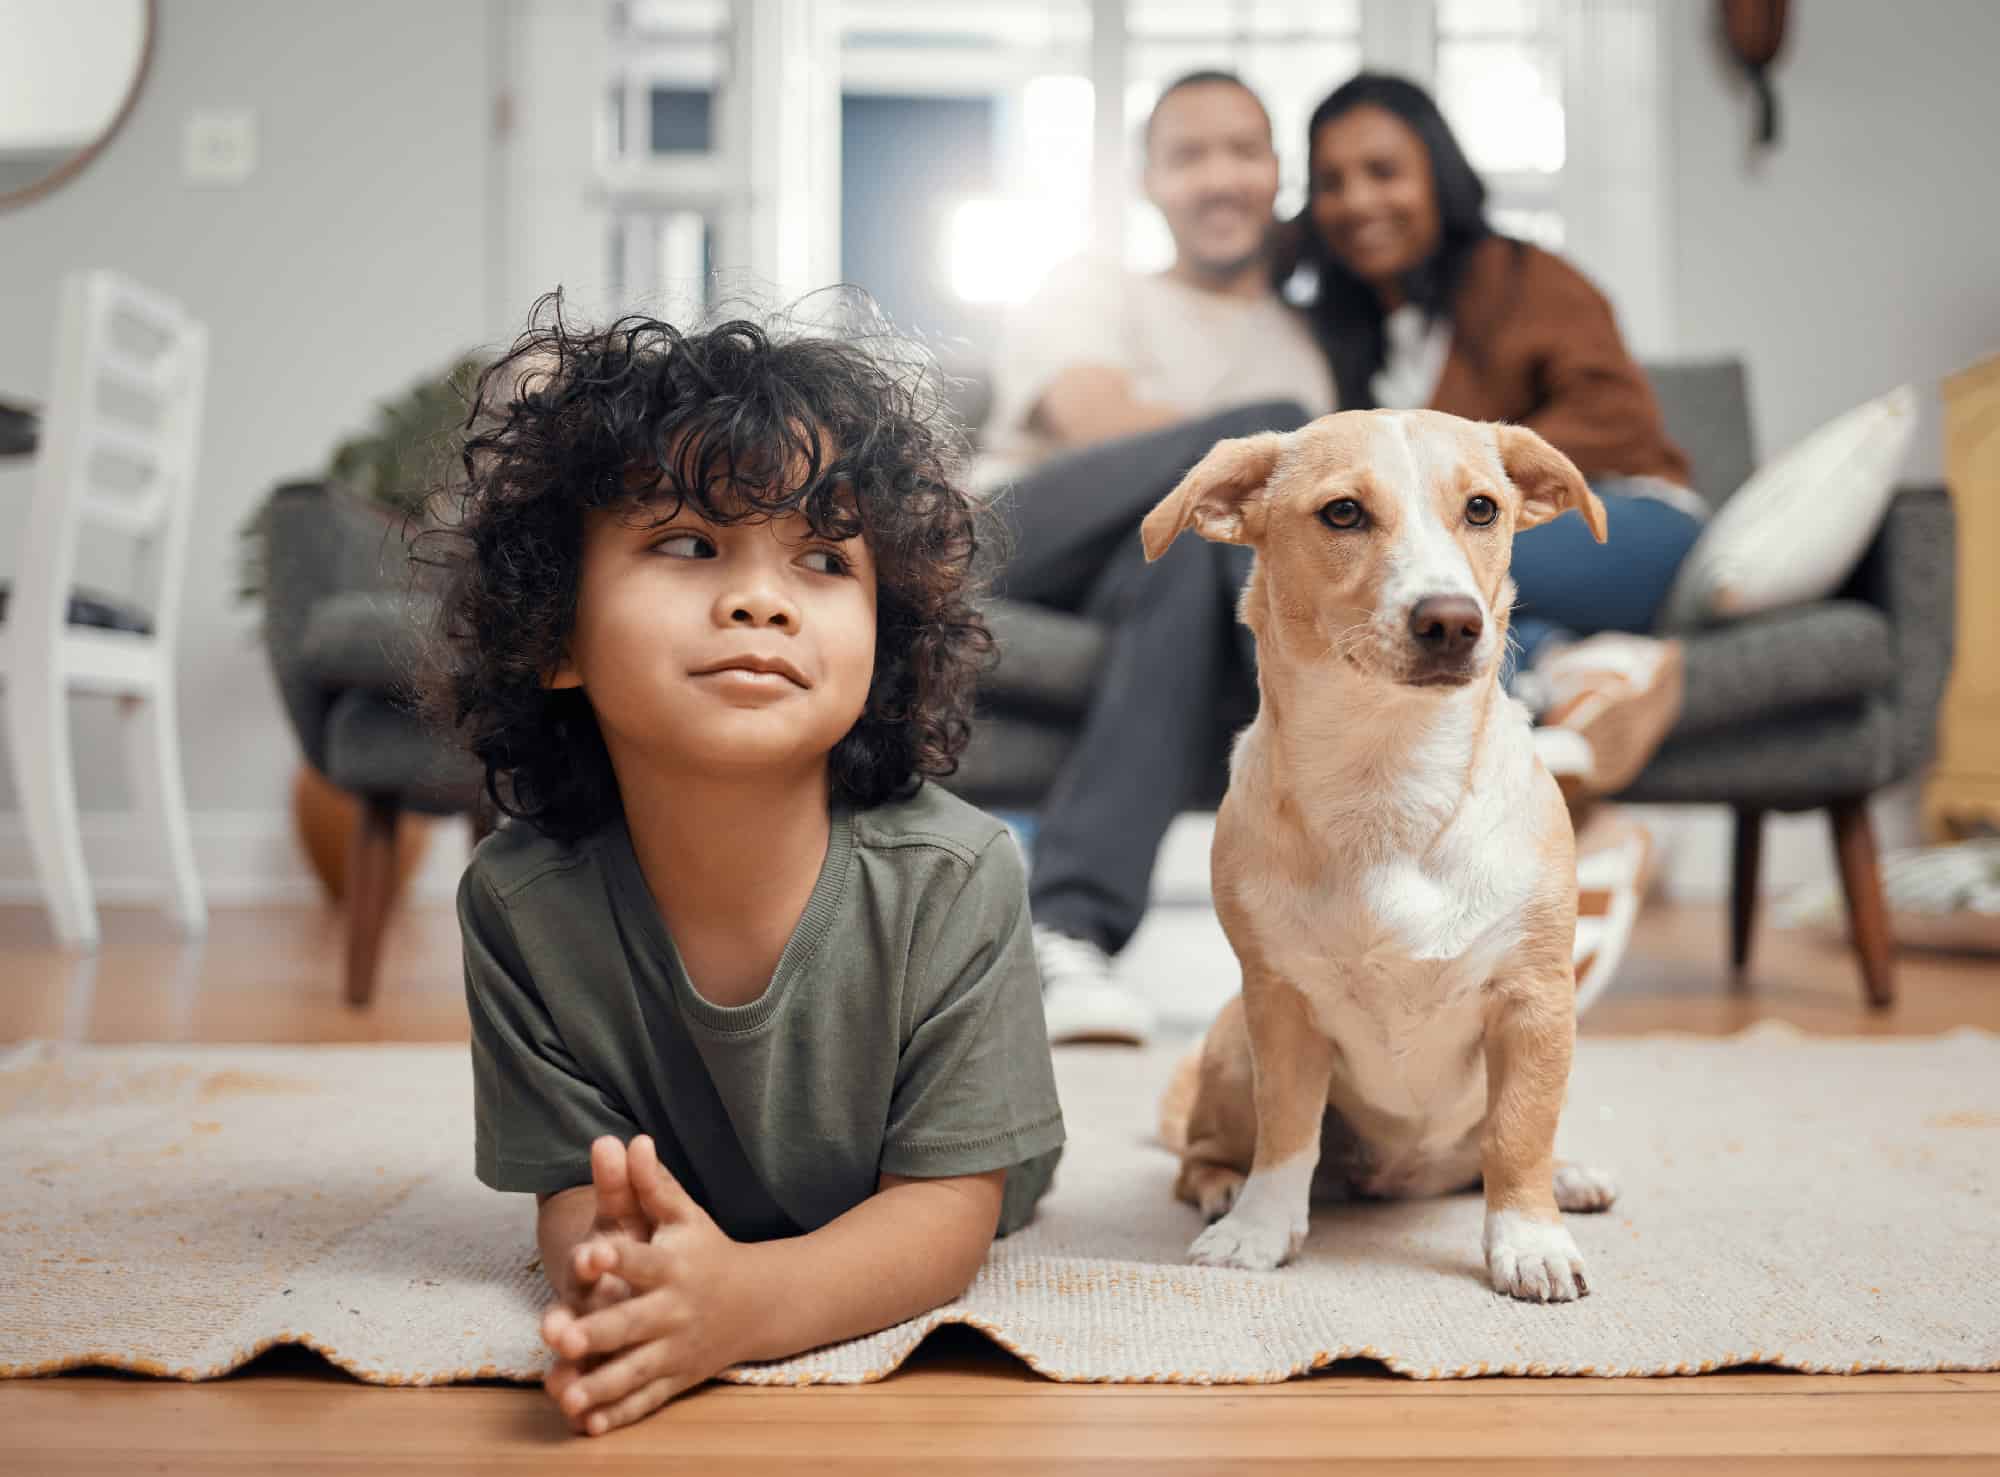 Child on living room floor with dog